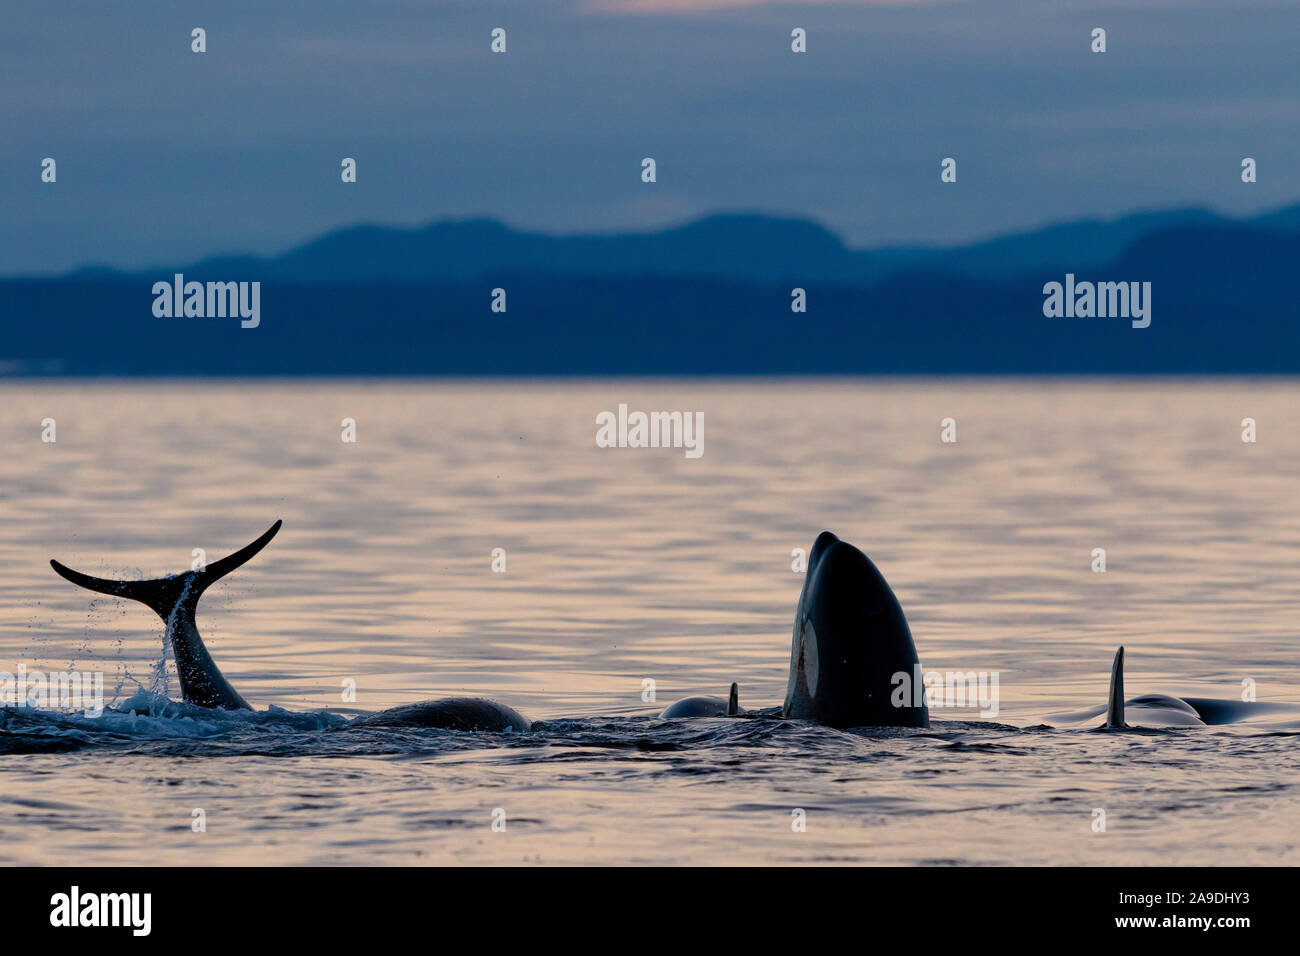 Northern resident killer whales (Orcinus orca) A24's and A36's playing, tail splashing and spying during sunset at Queen Charlotte Strait off Vancouve Stock Photo